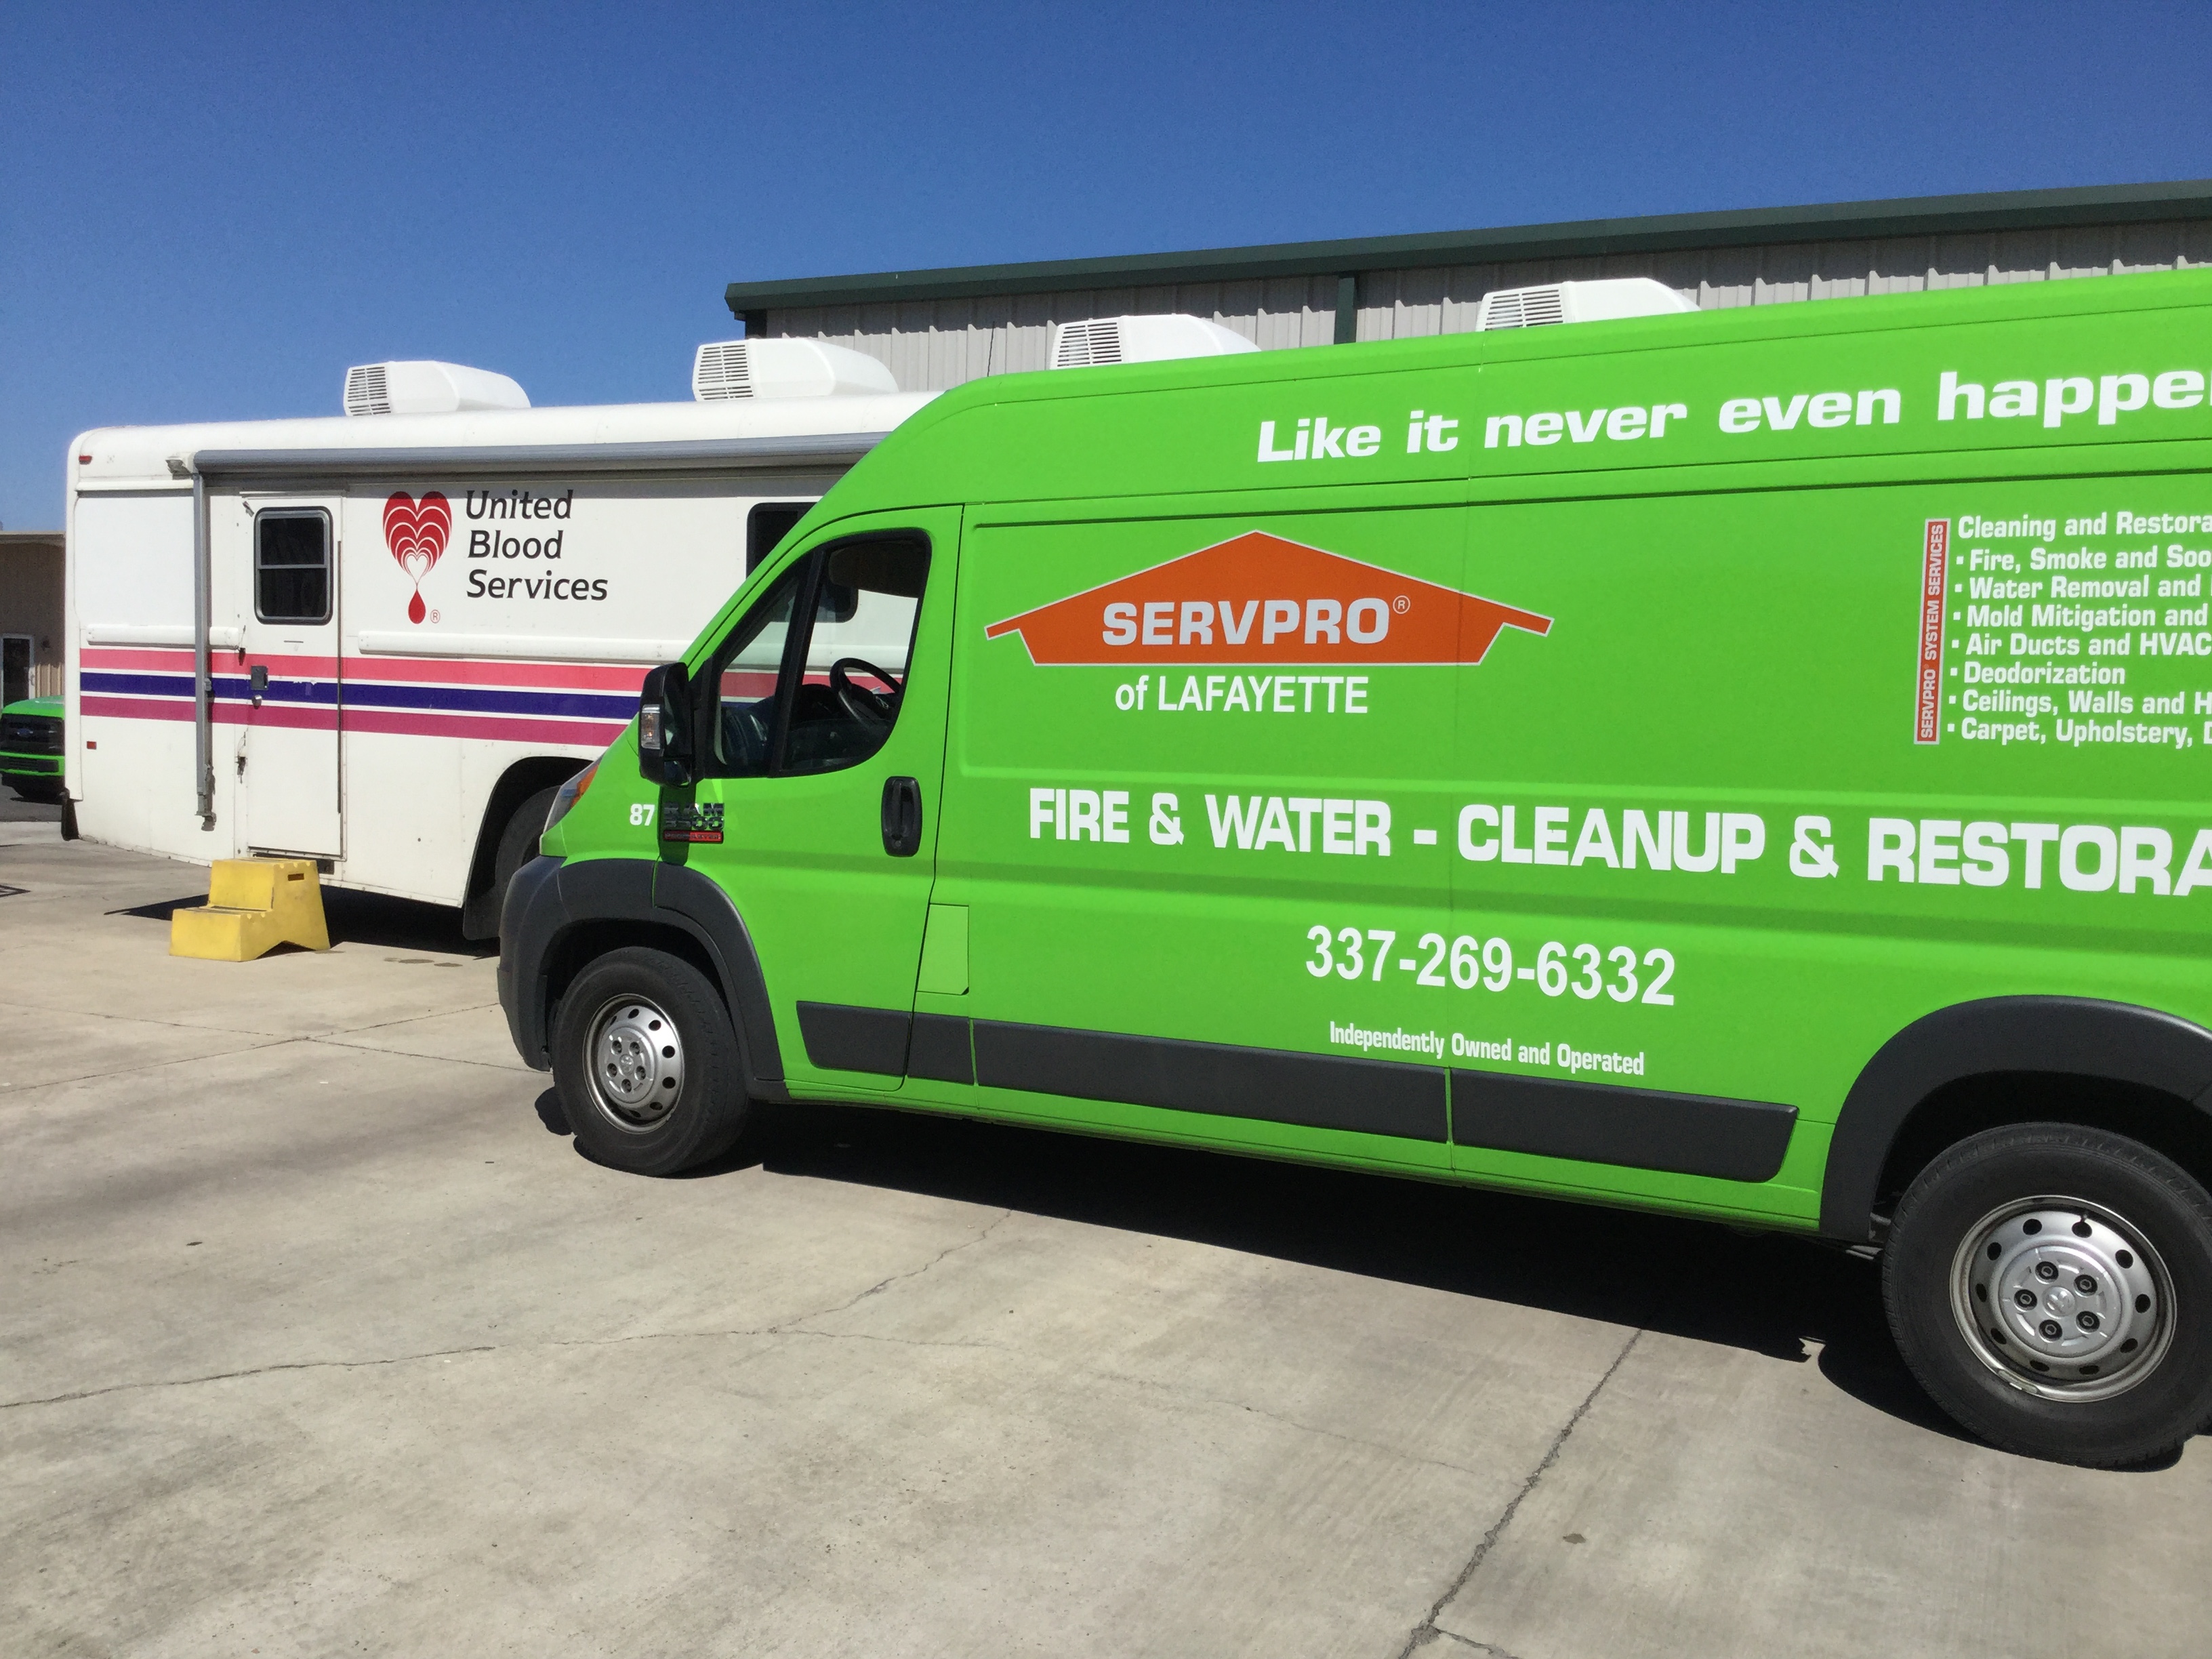 SERVPRO of Lafayette gives back to their community!